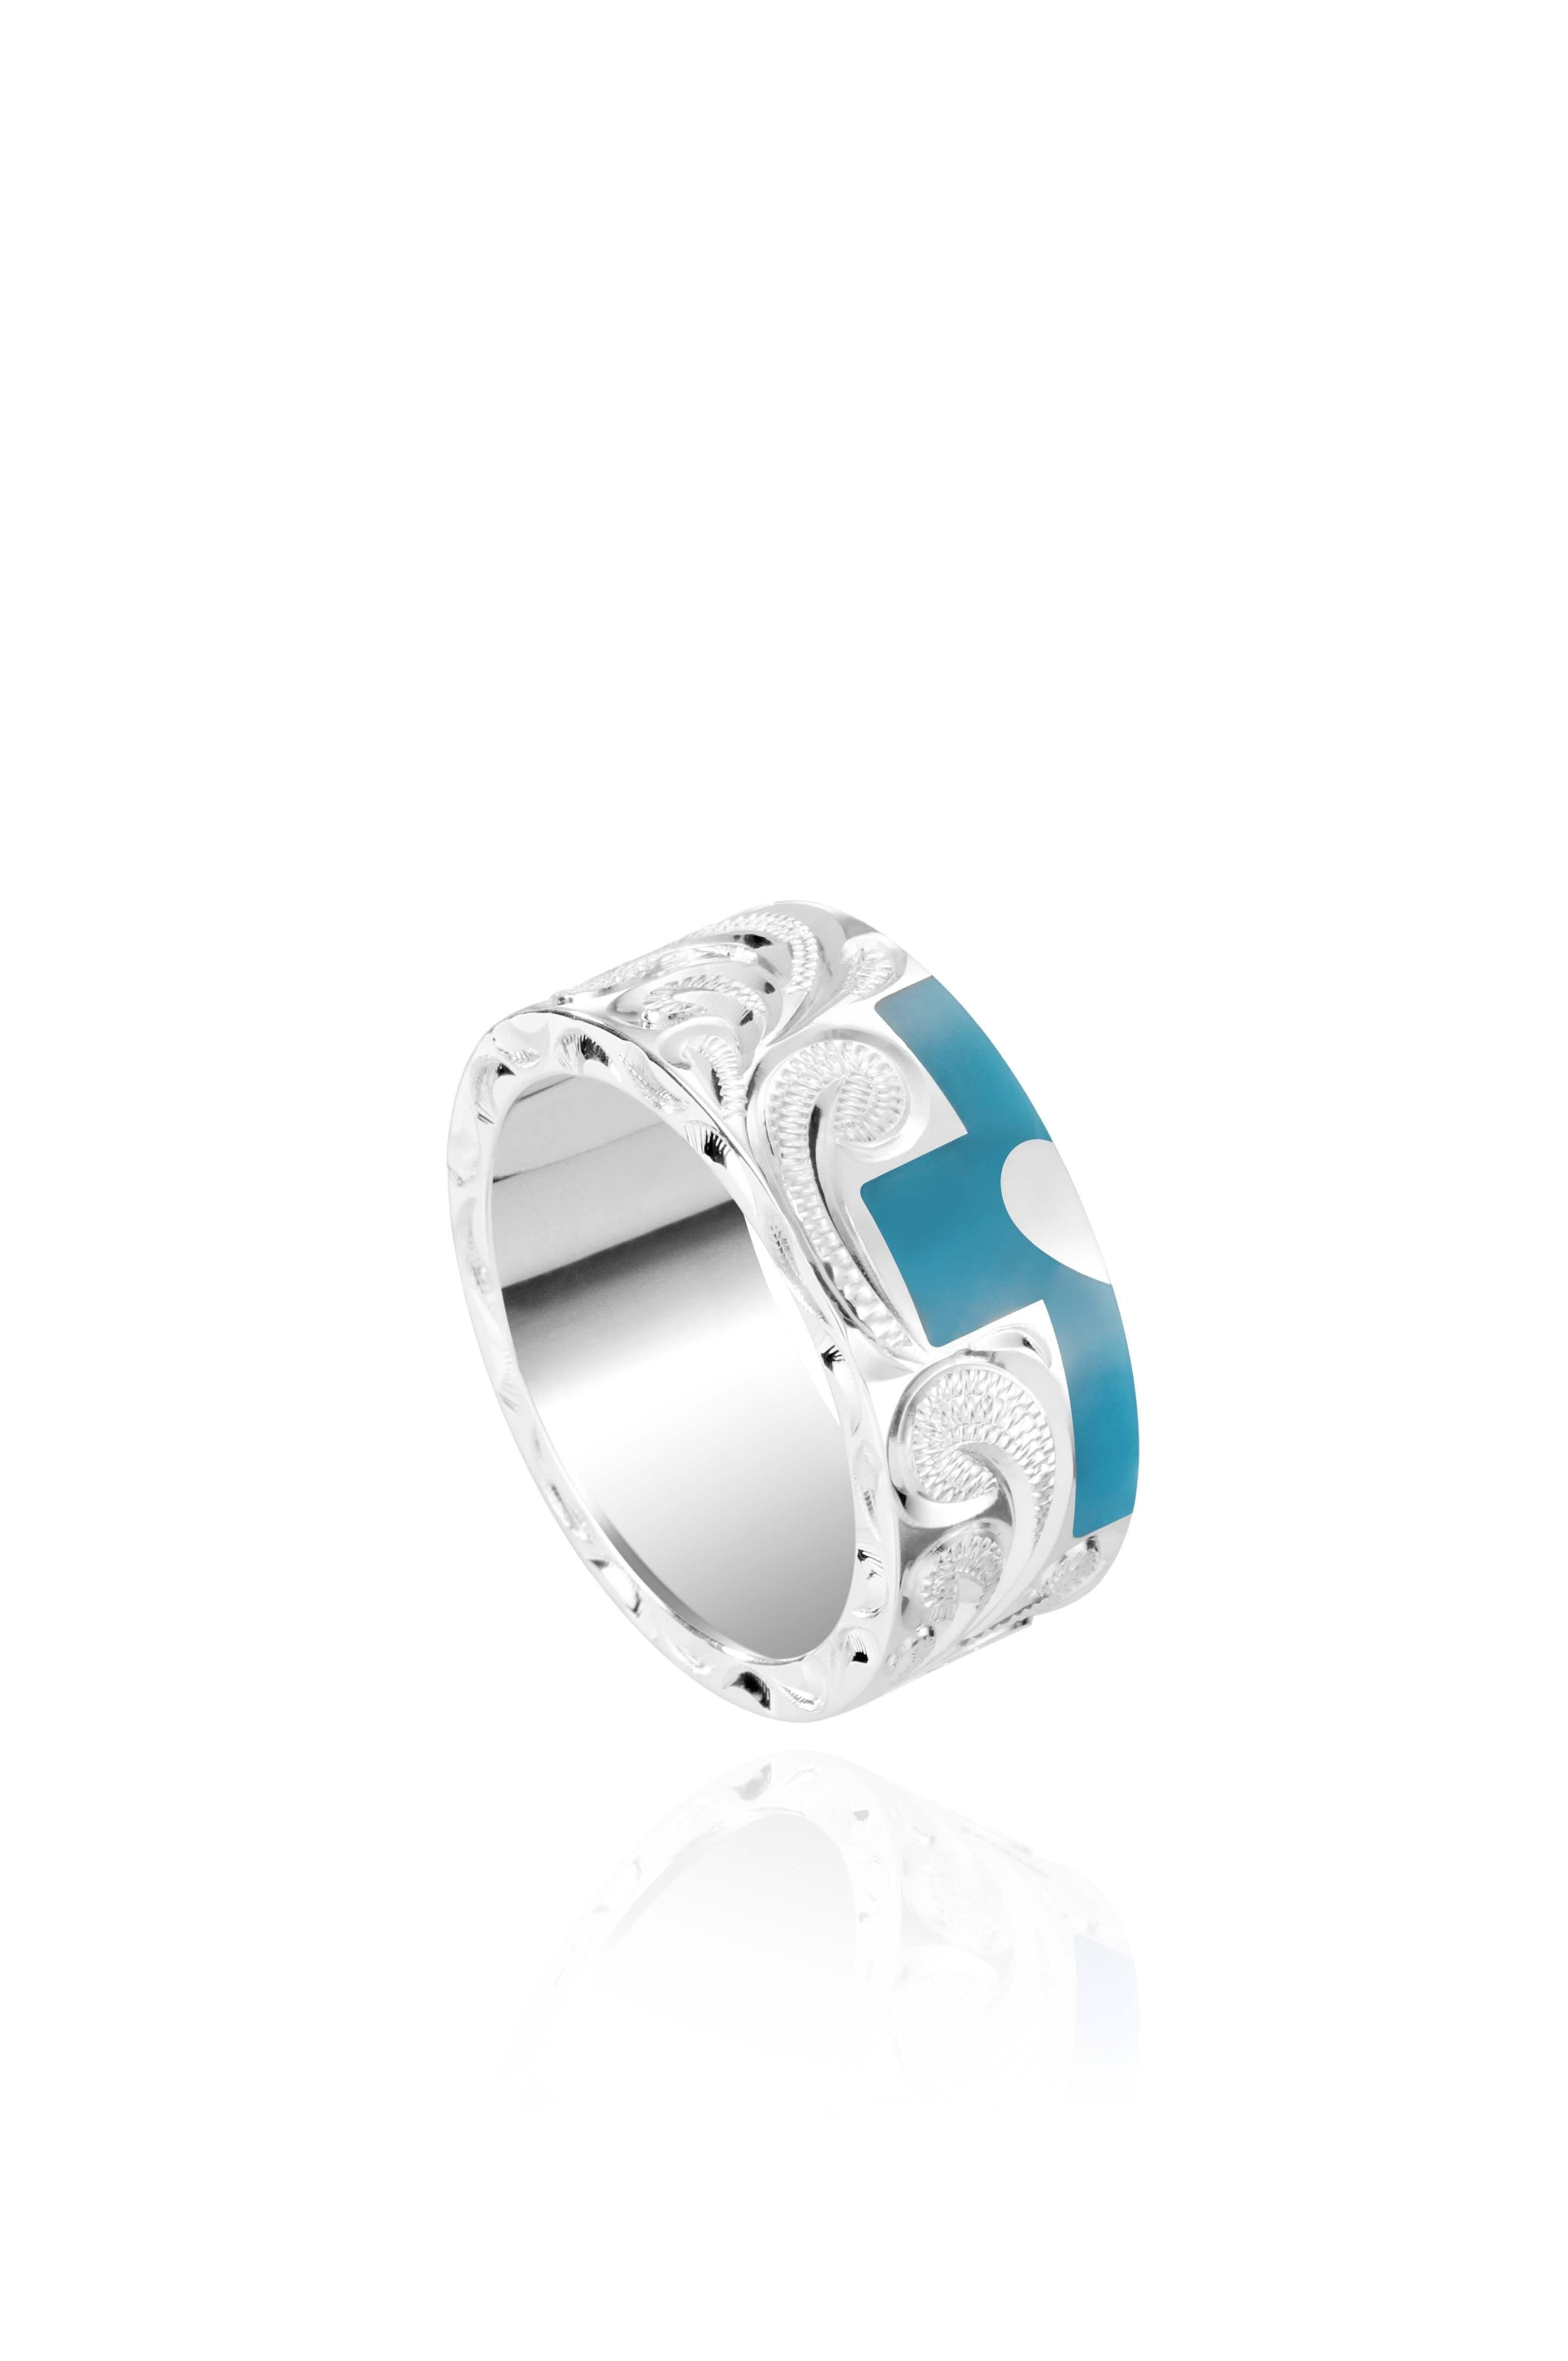 The picture shows a part of a set 925 sterling silver left half cross ring with hand-engravings, heart, and a turquoise gemstone.